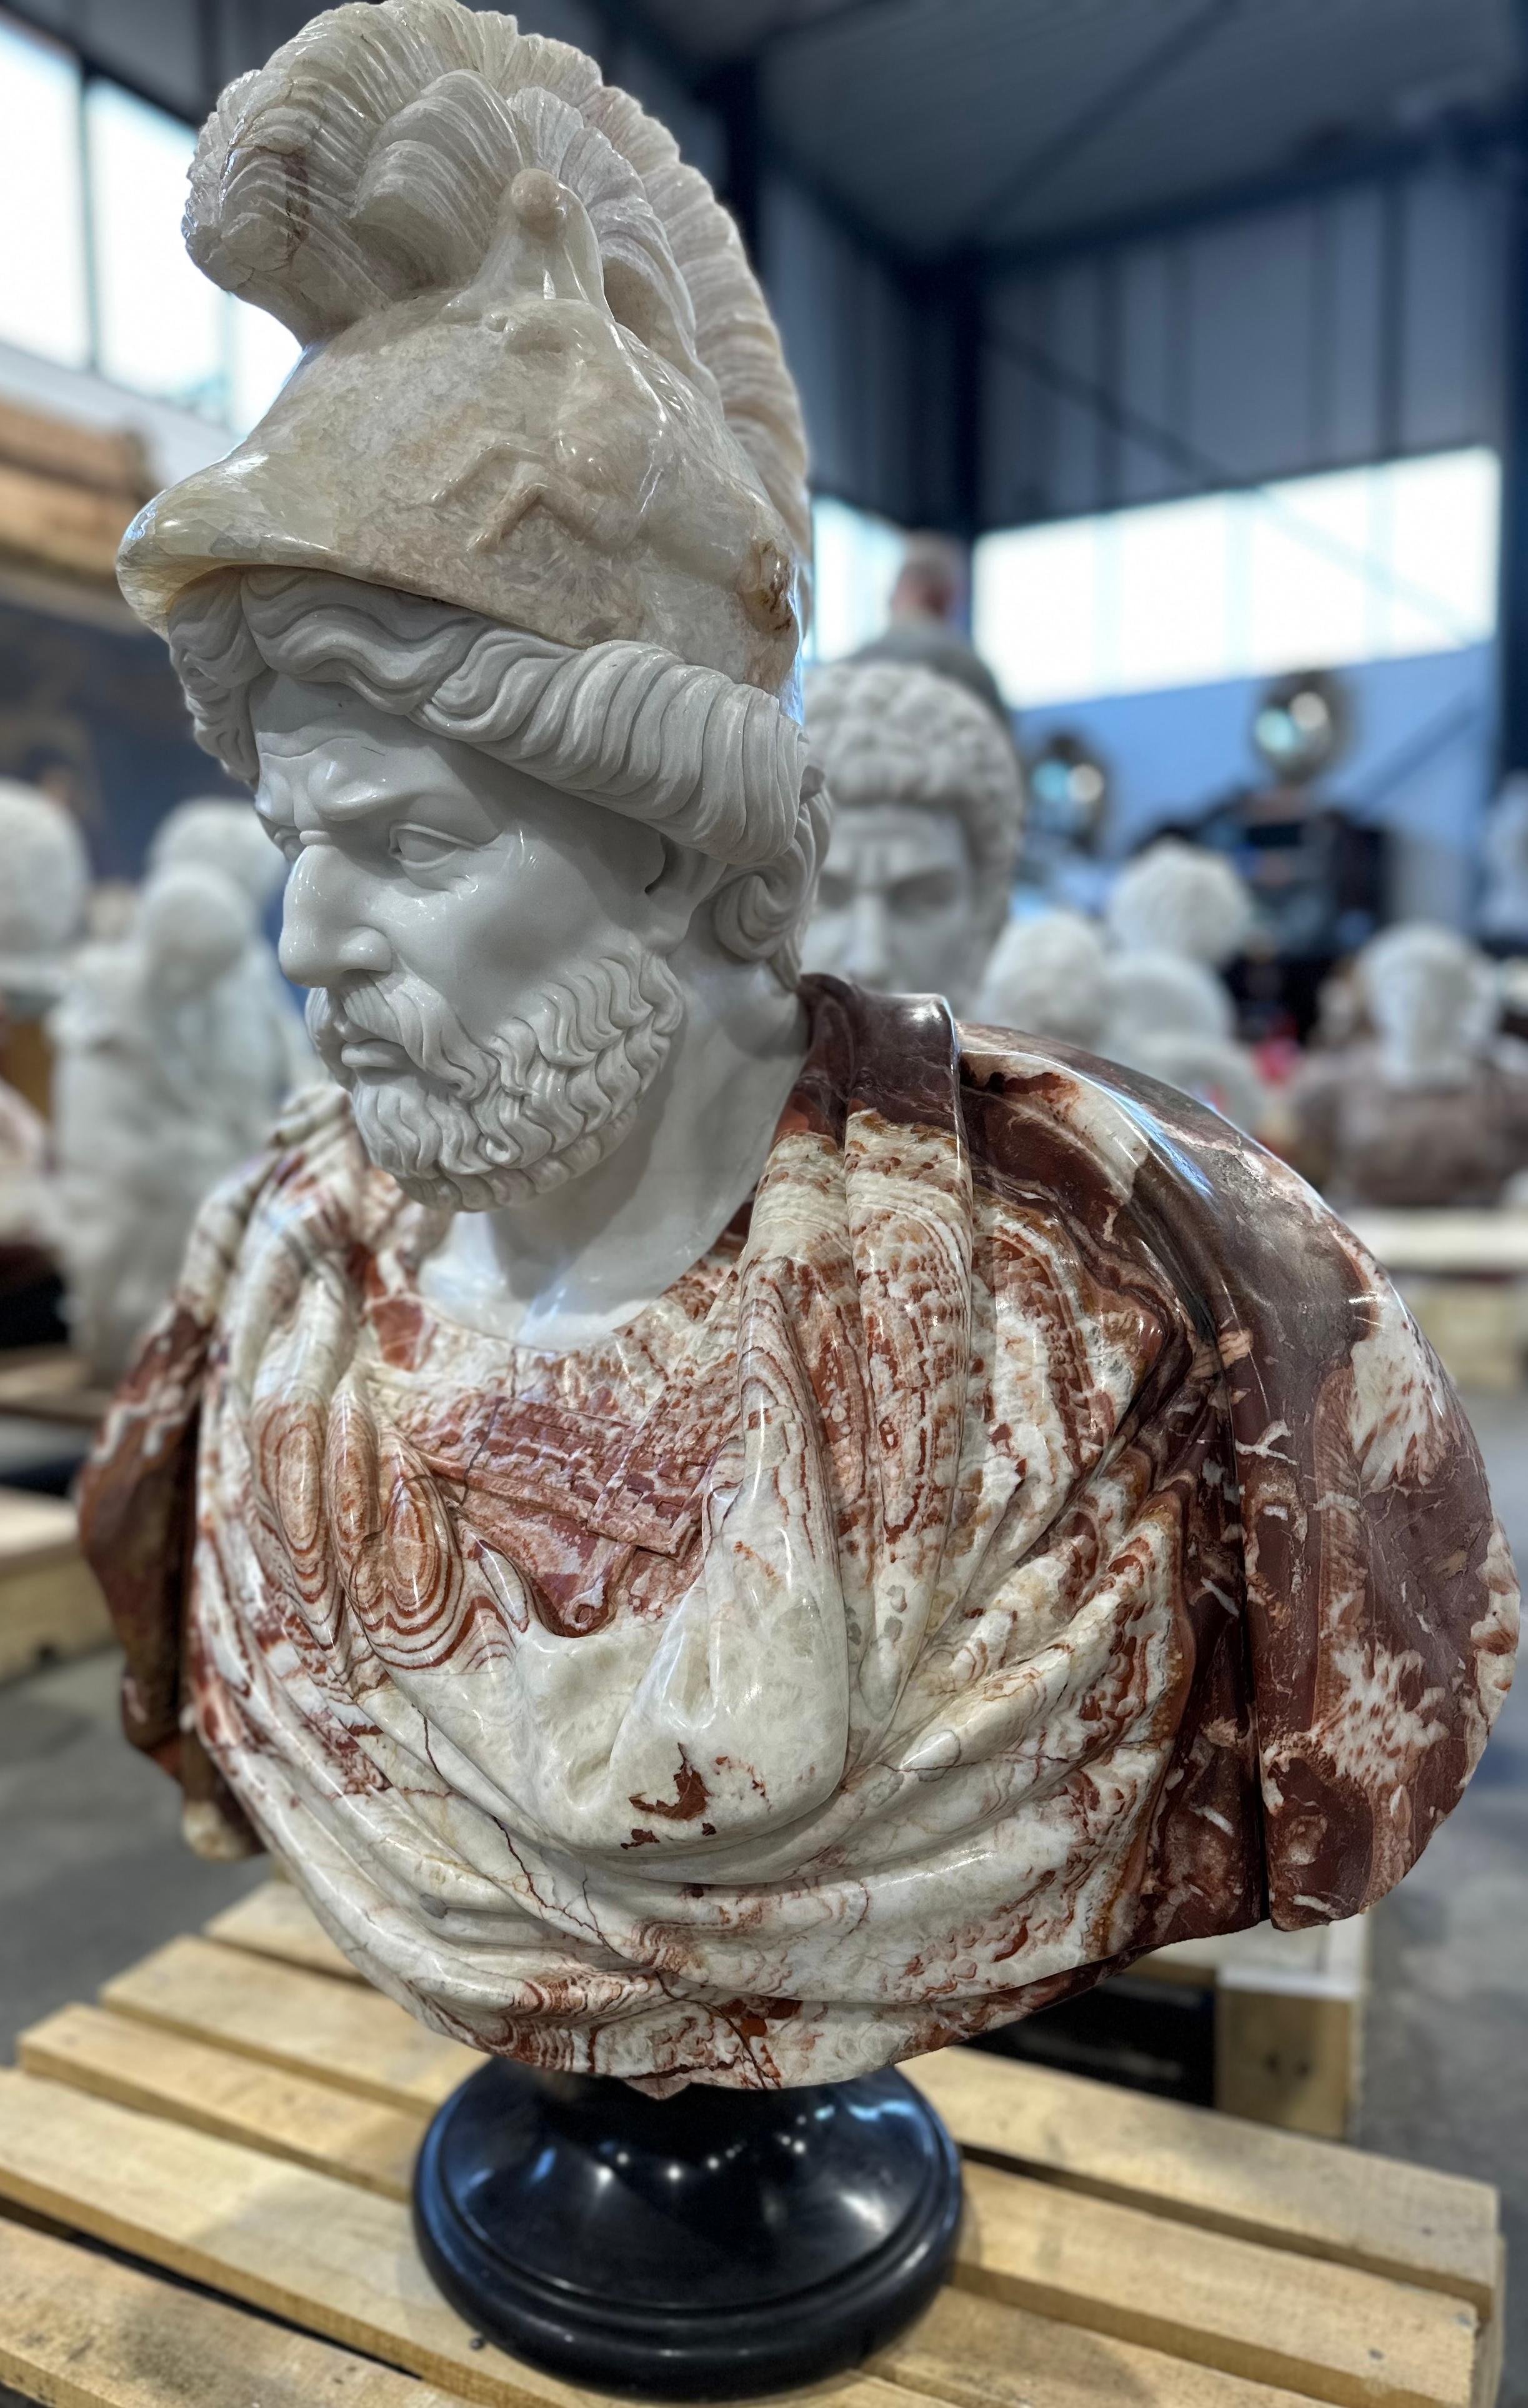 Handsomely and skilfully carved, two coloured marble male bust on black marble stand, in the classical style.
The features are clear, with detailing showing the curled hair and beard. The clothing is carved in smooth folds showing the beauty and